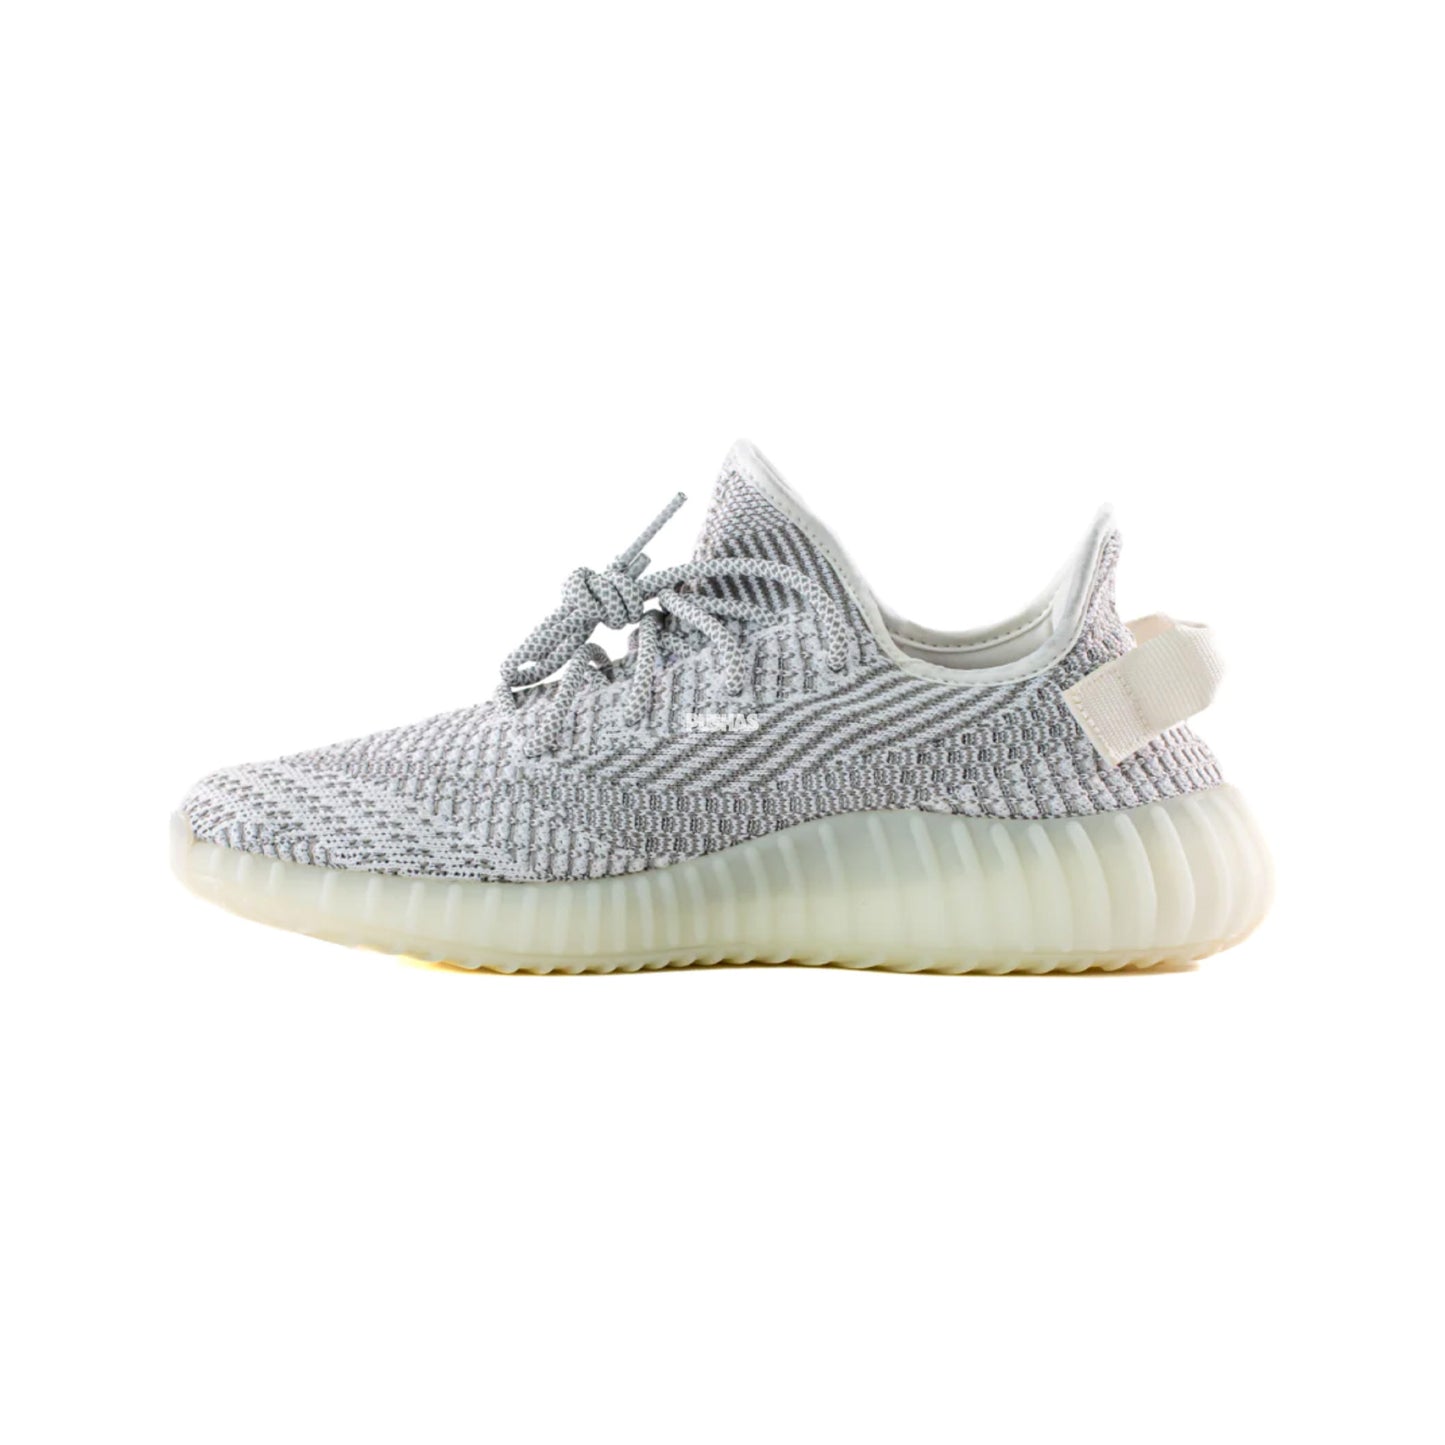 Yeezy-Boost-350-V2-Static-Non-Reflective-New